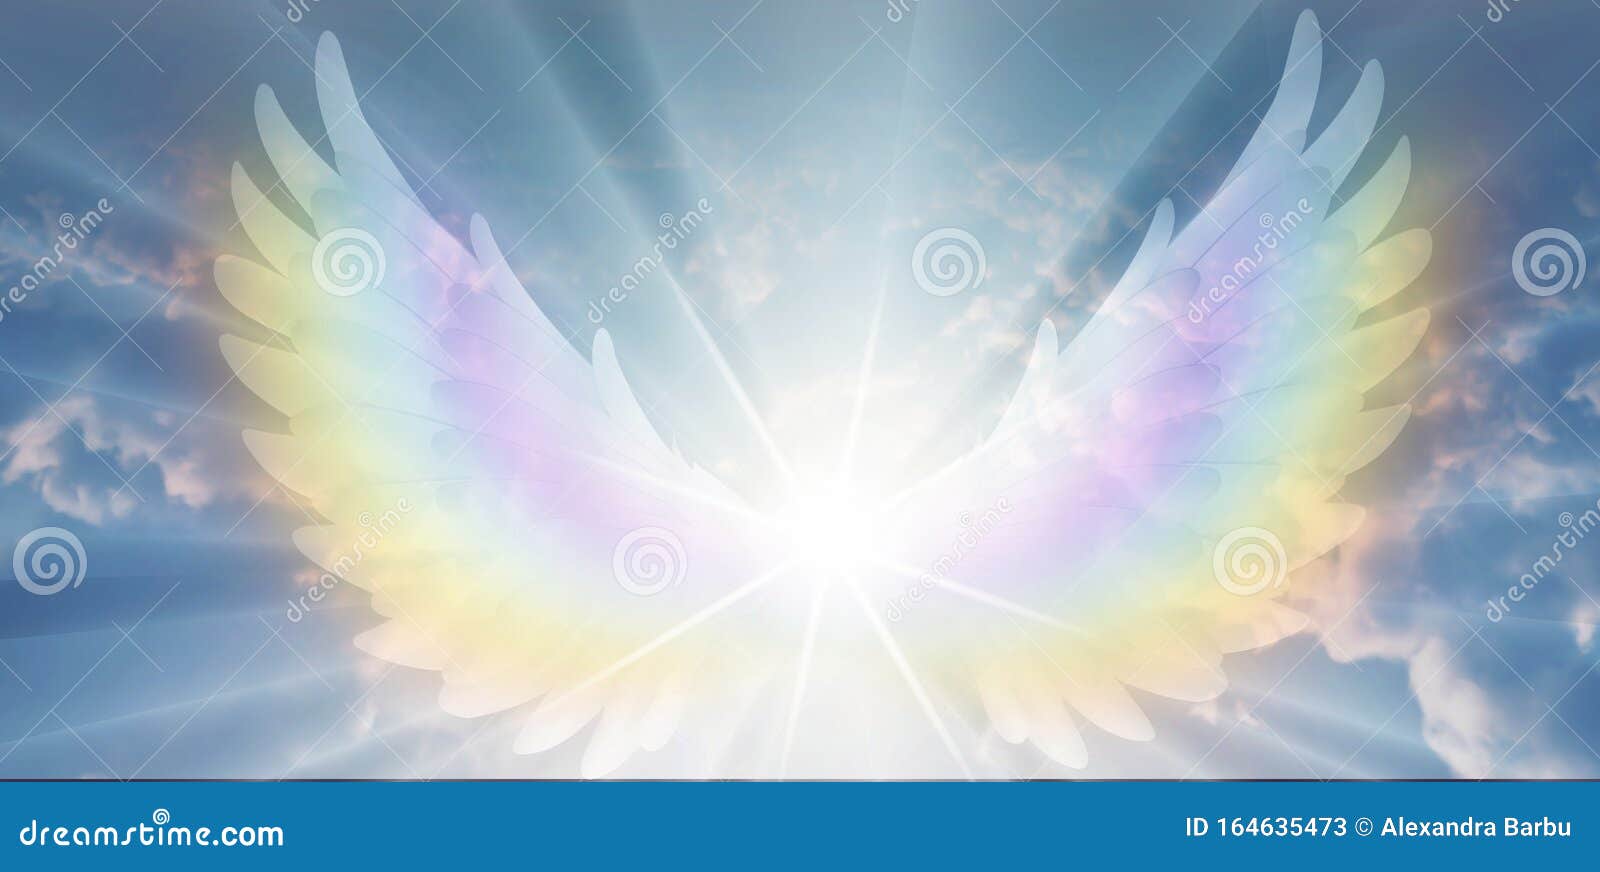 spiritual guidance, angel of light and love doing a miracle on sky, rainbow angelic wings